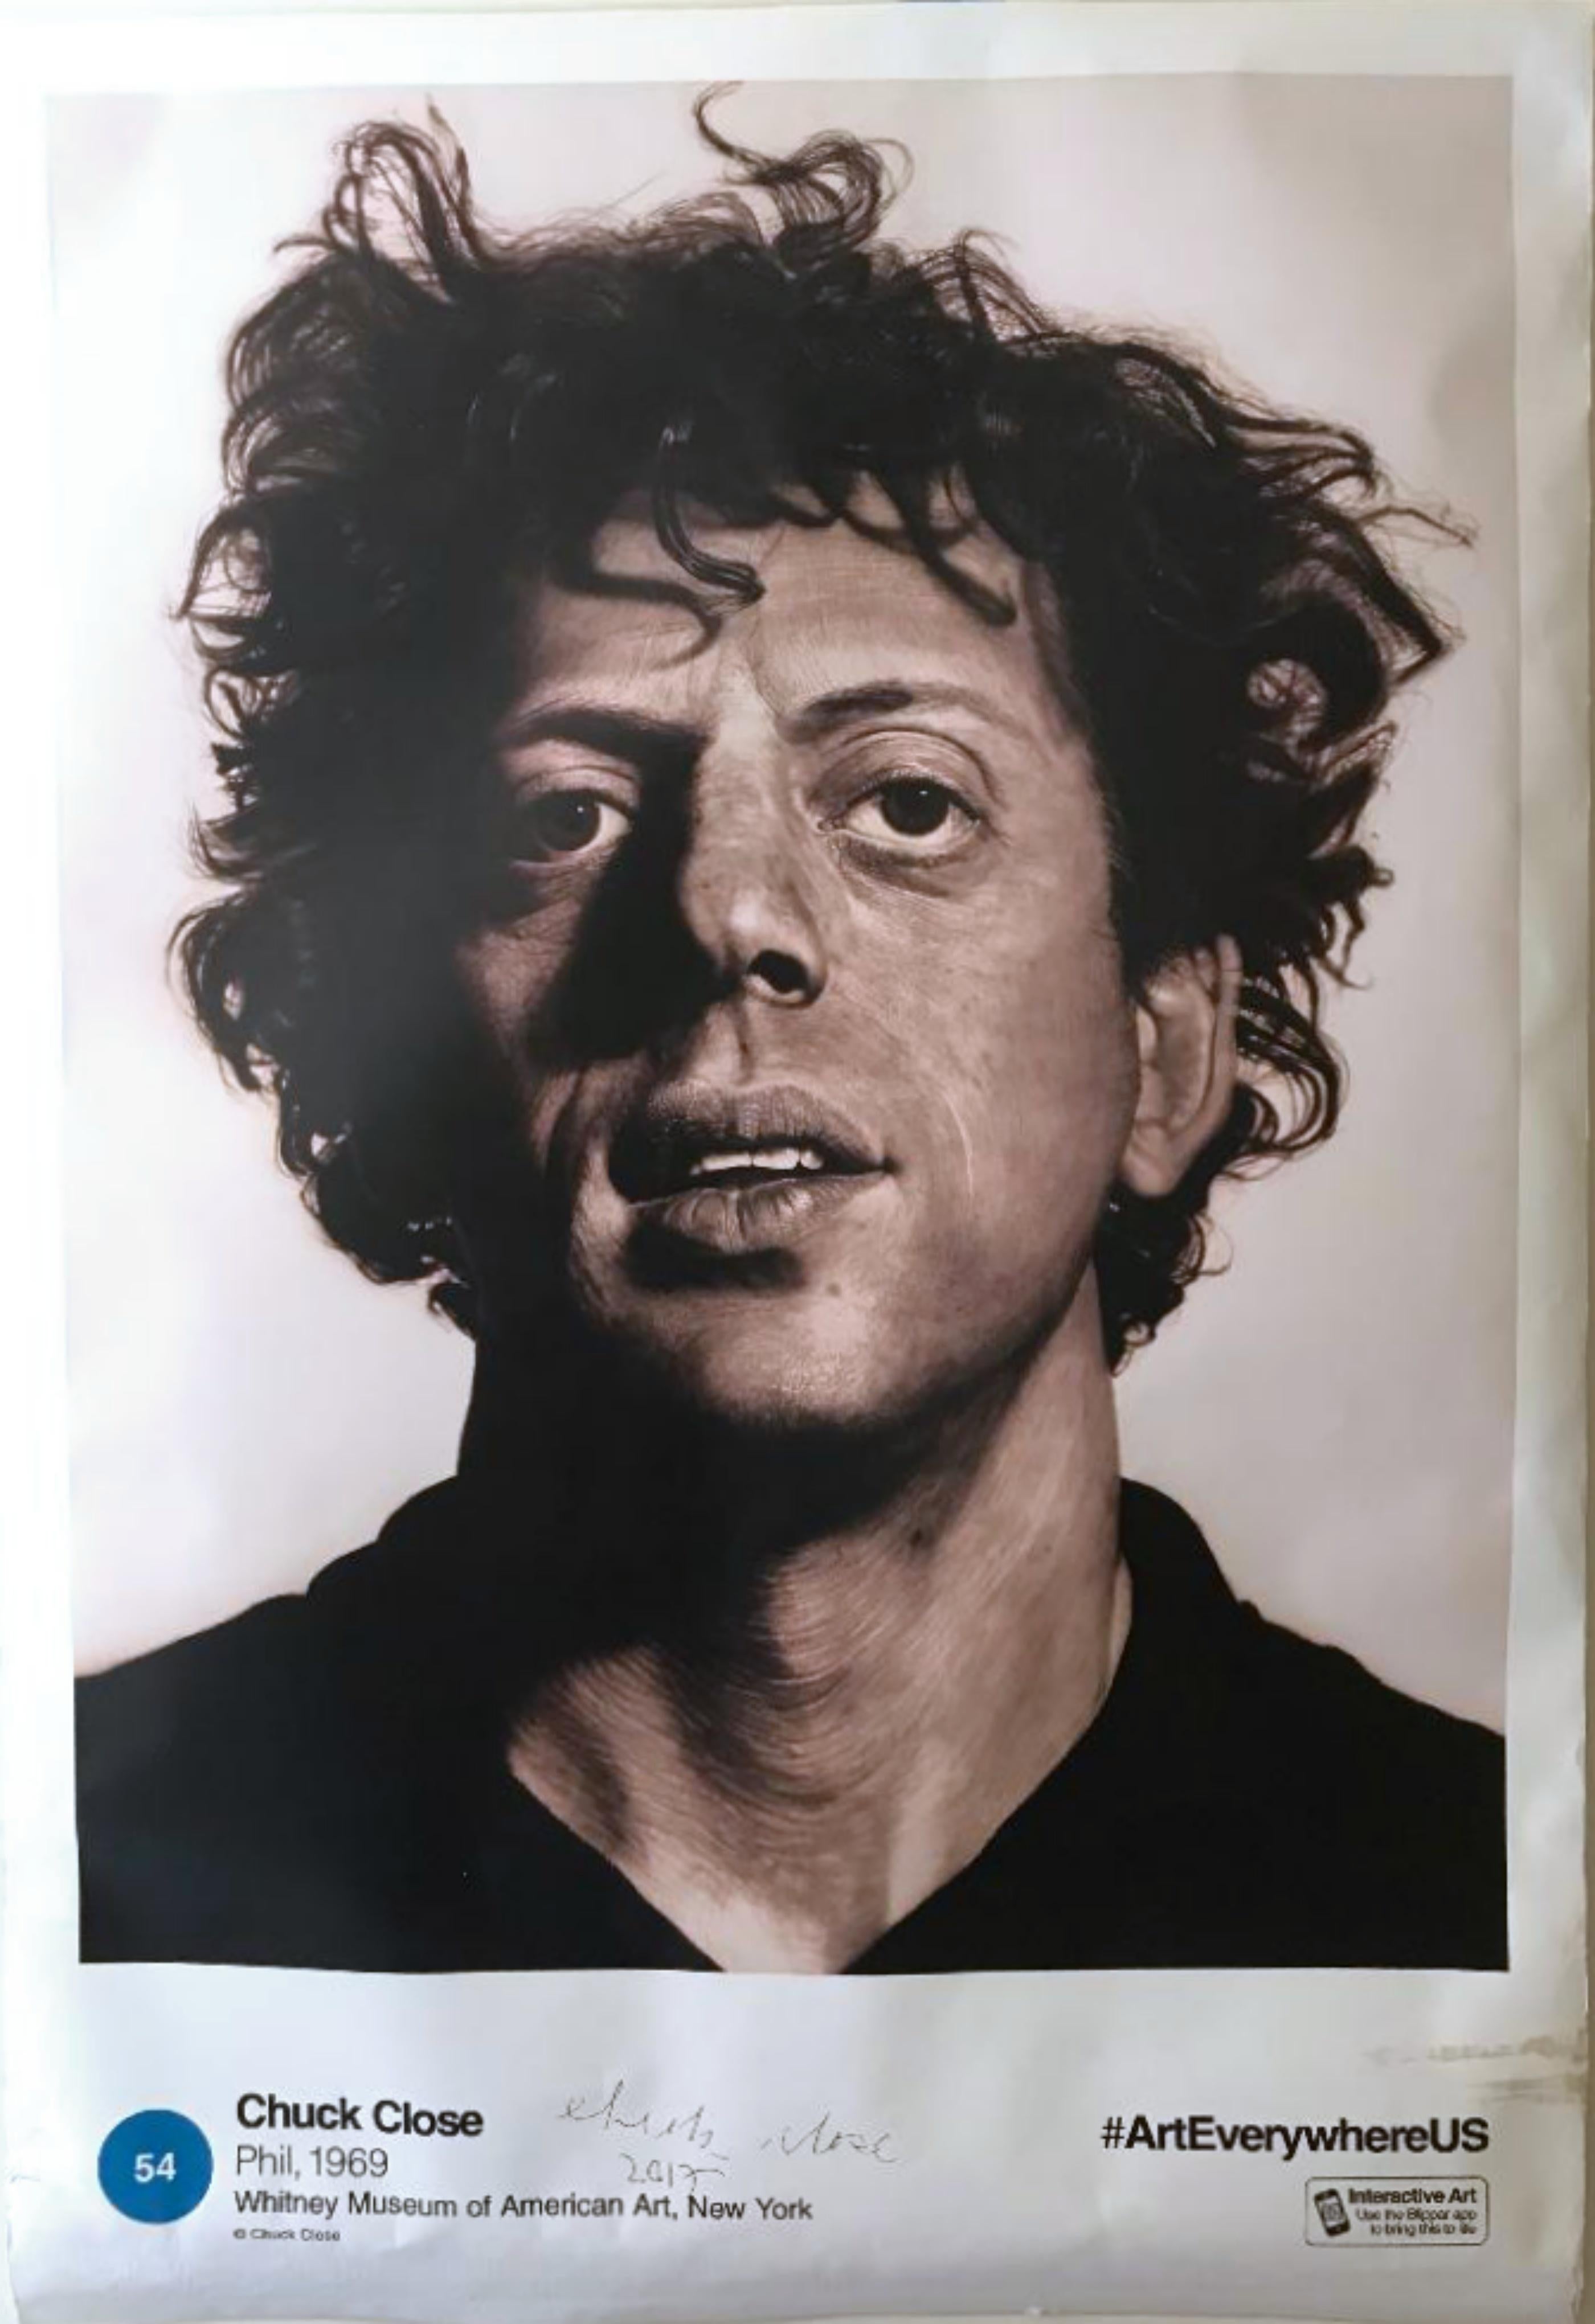 Chuck Close Figurative Print - Phil (Hand Signed) - over 7 feet high - outdoor billboard